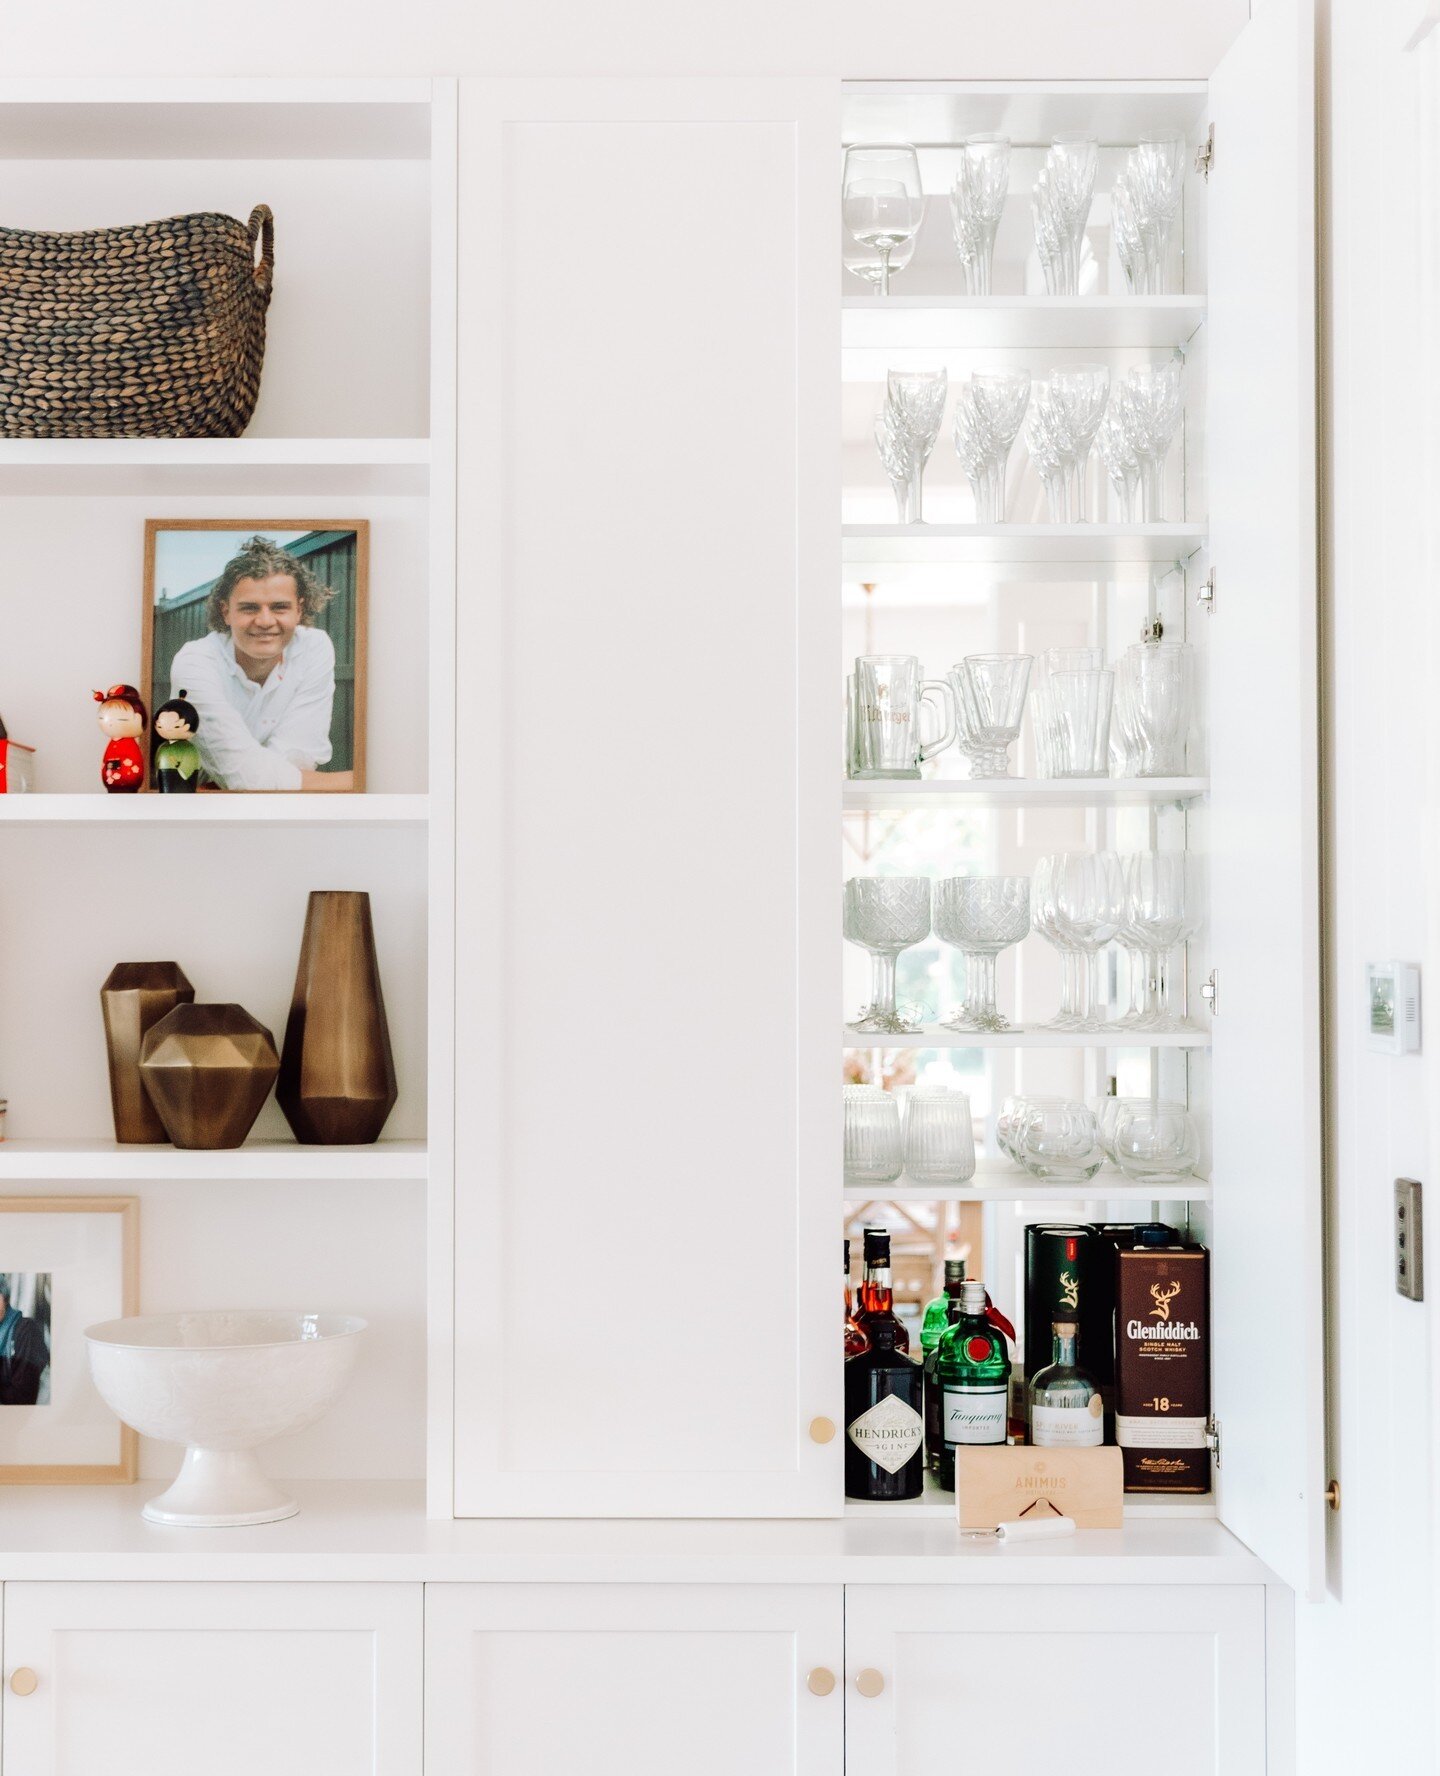 Who needs a good bar cabinet in their living room? 🍸⁠
⁠
#covethomes #kyneton #kynetonbuilder #macedonrangesbuilder #macedonranges ⁠
#cocktailbar #craftcocktails #cocktailtime #liquor #wine #drink #thirsty #champagne #cocktails #drinks #party #yum